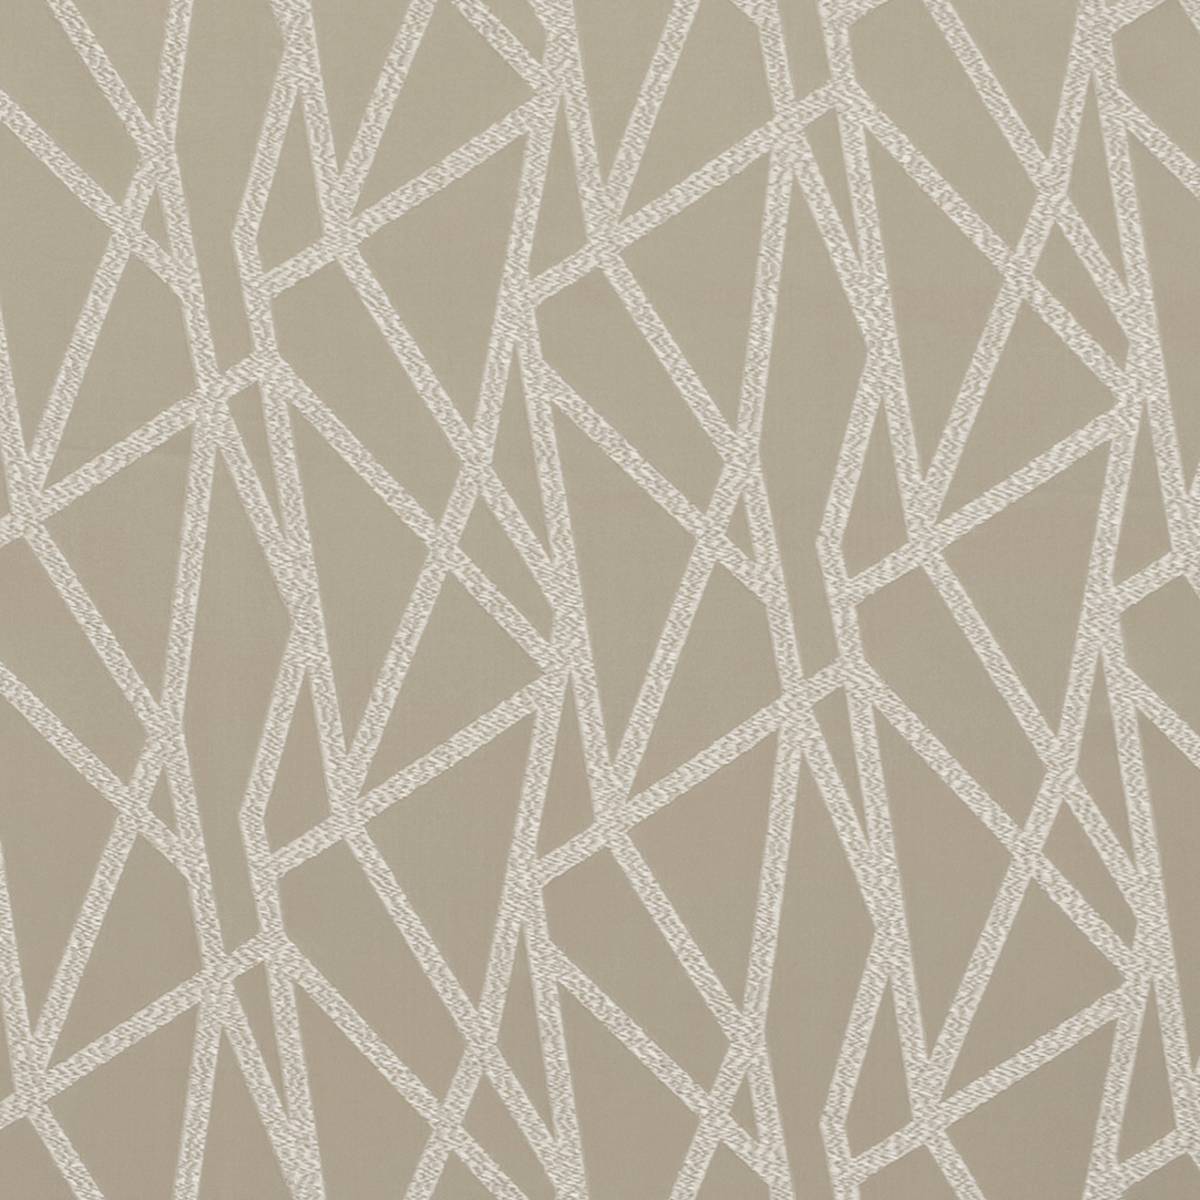 Geomo Taupe Fabric by Studio G